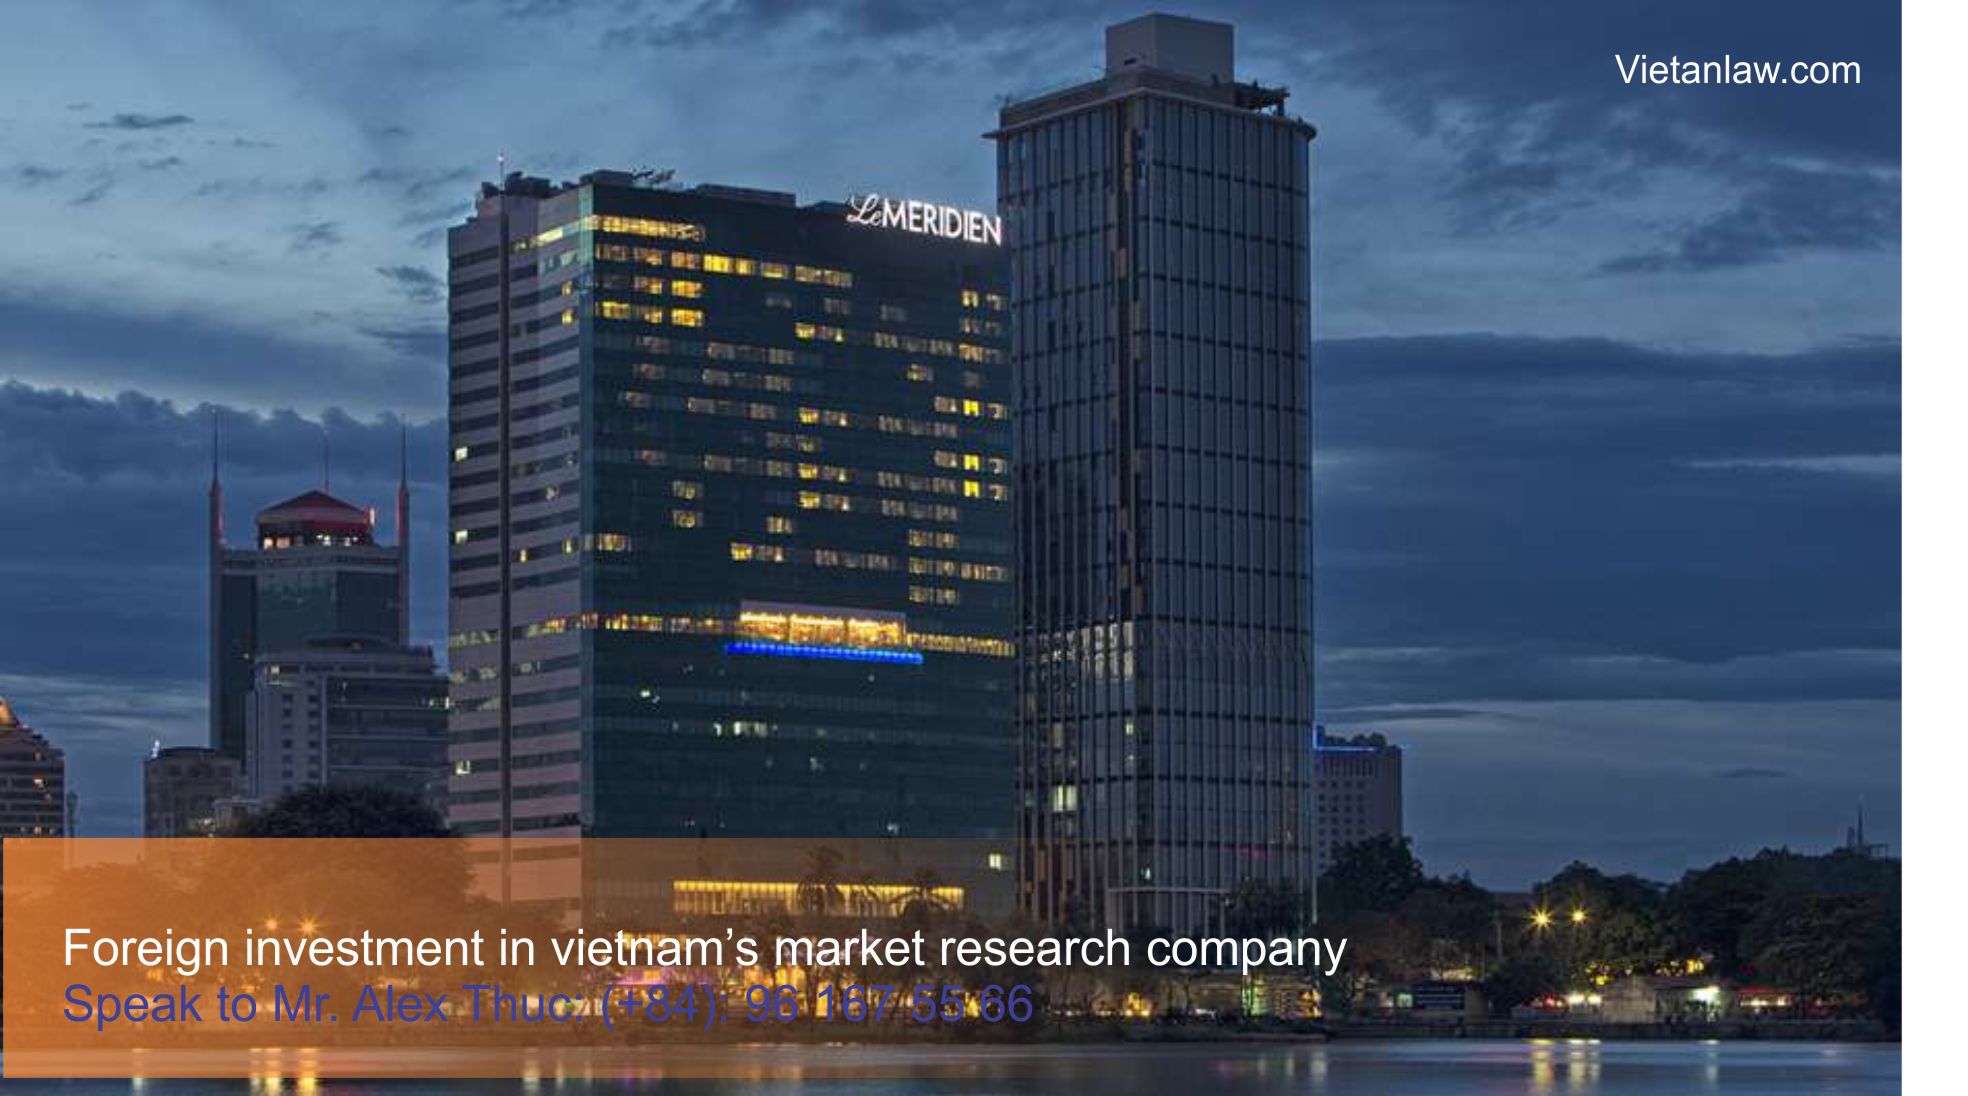 Foreign investment in vietnam’s market research company